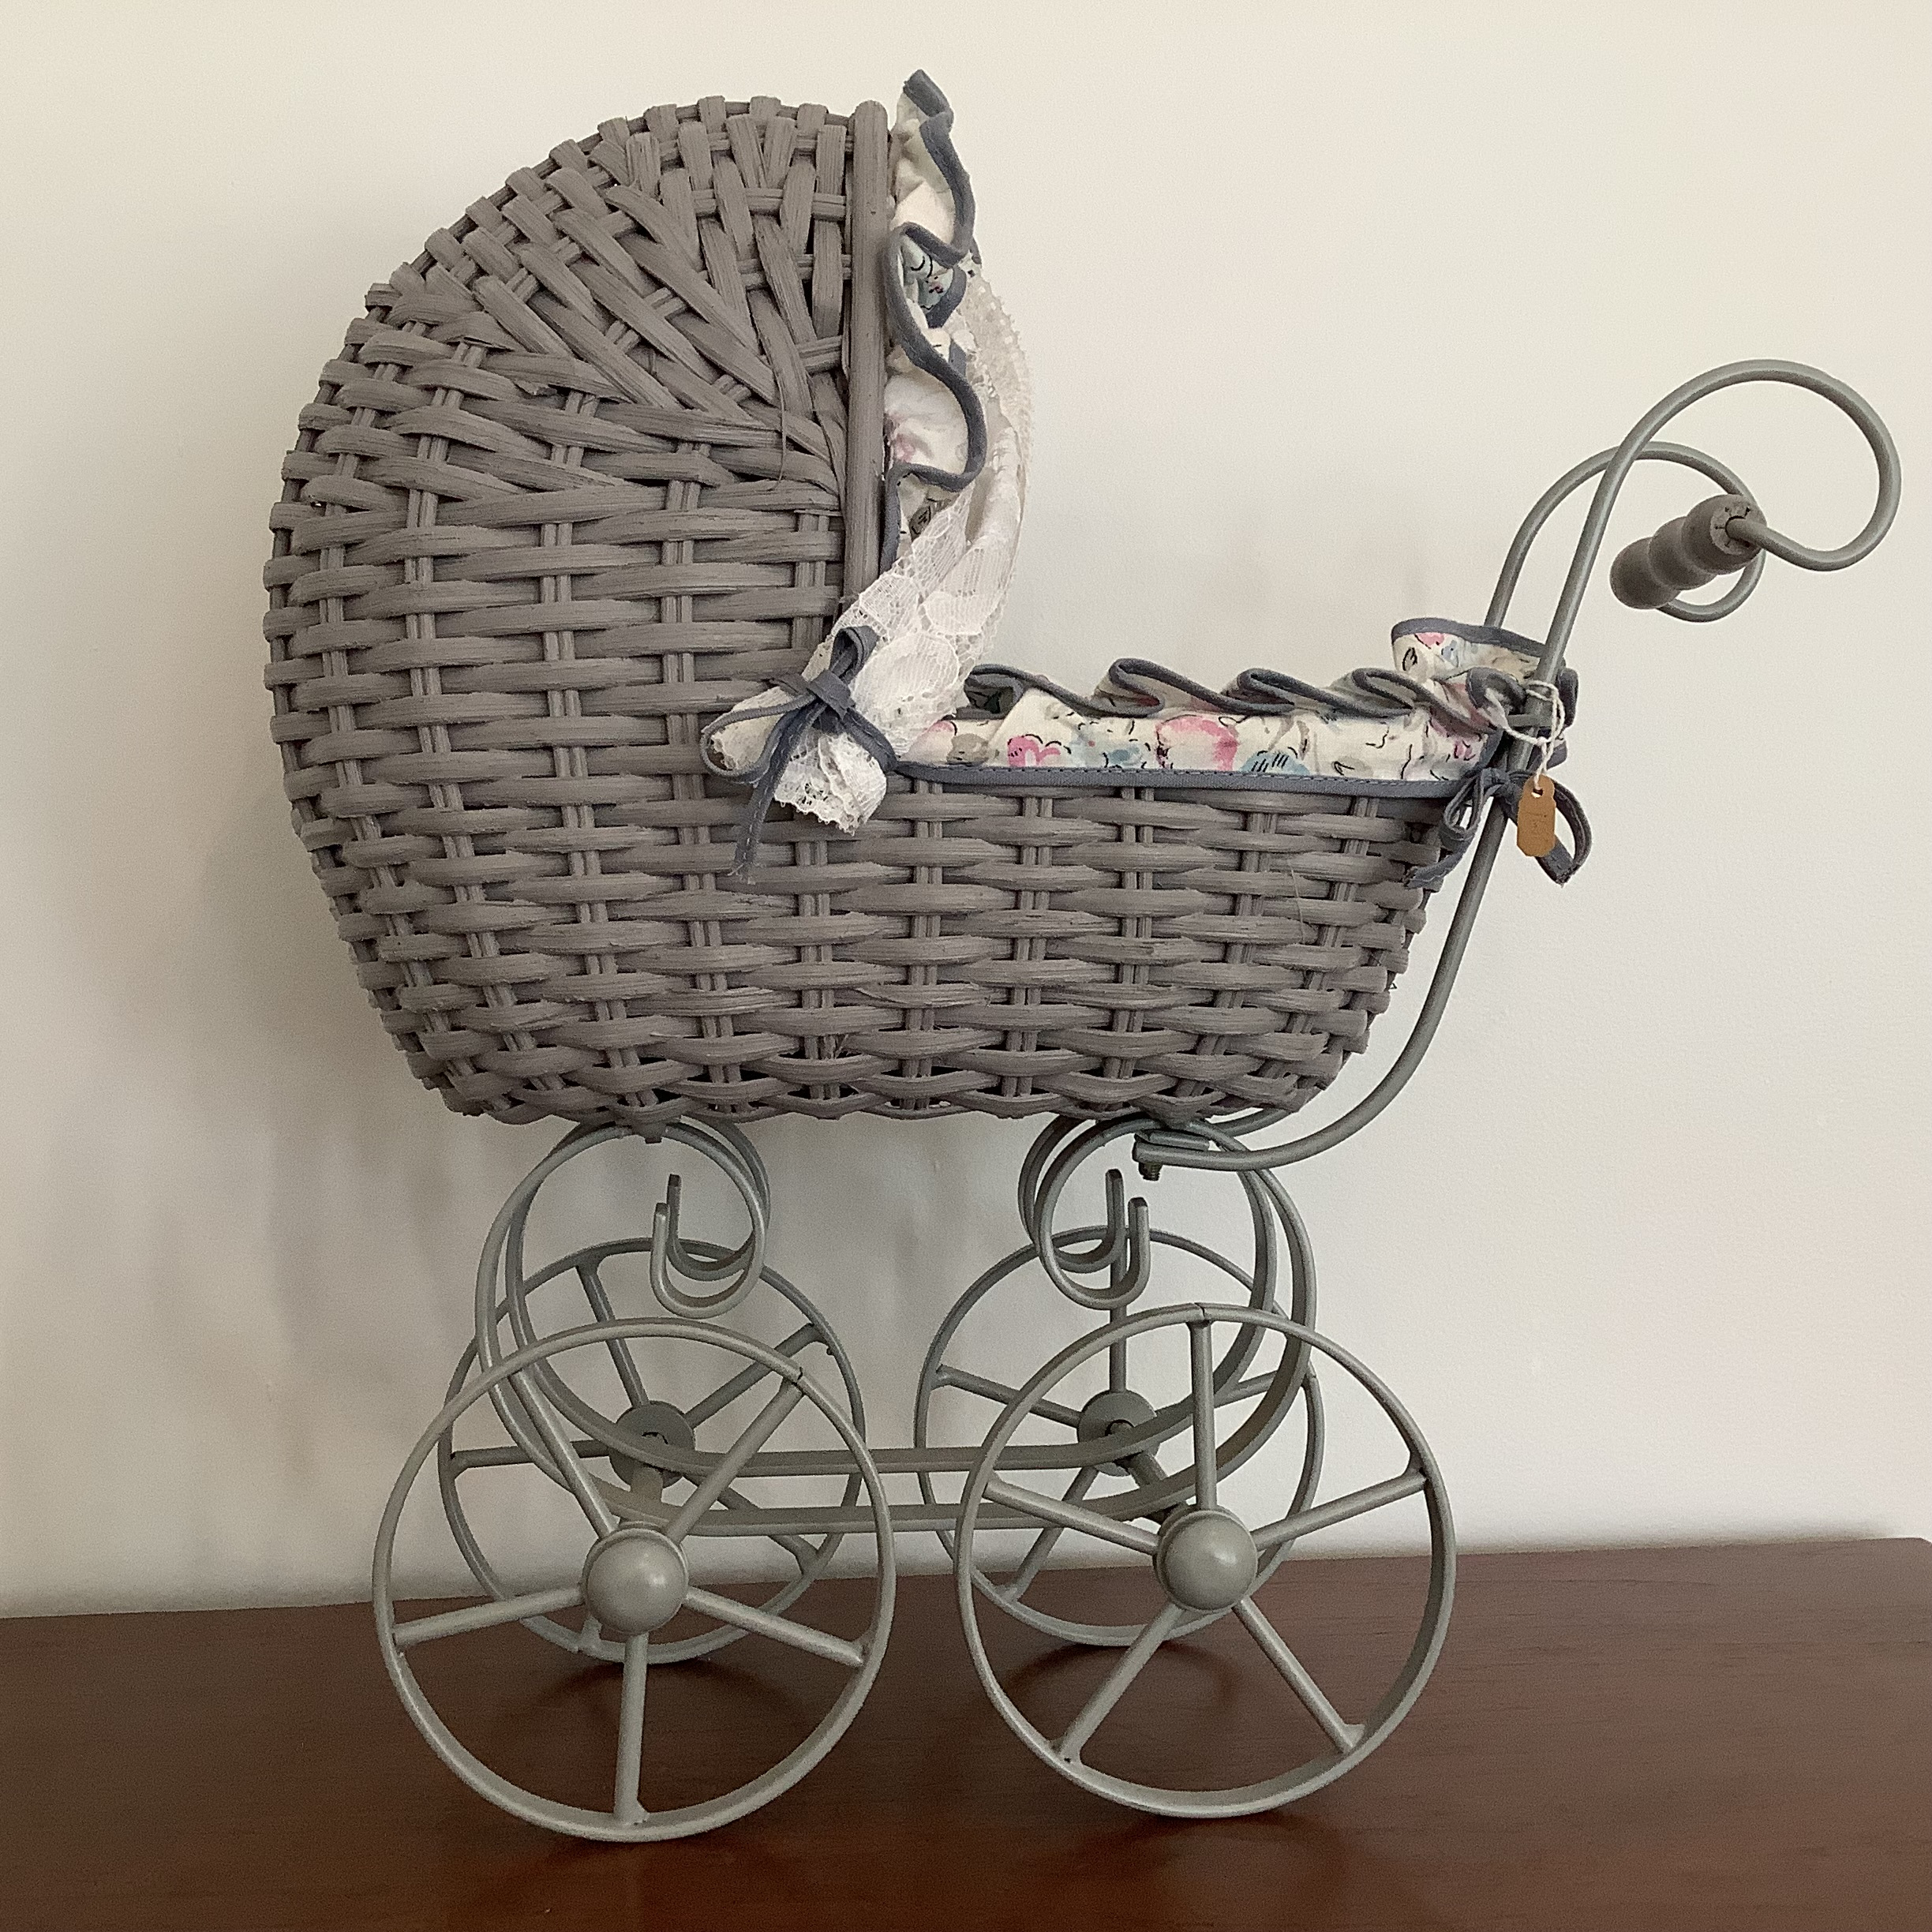 Grey-painted wicker stroller with extensive padded lining and curtains in a floral print